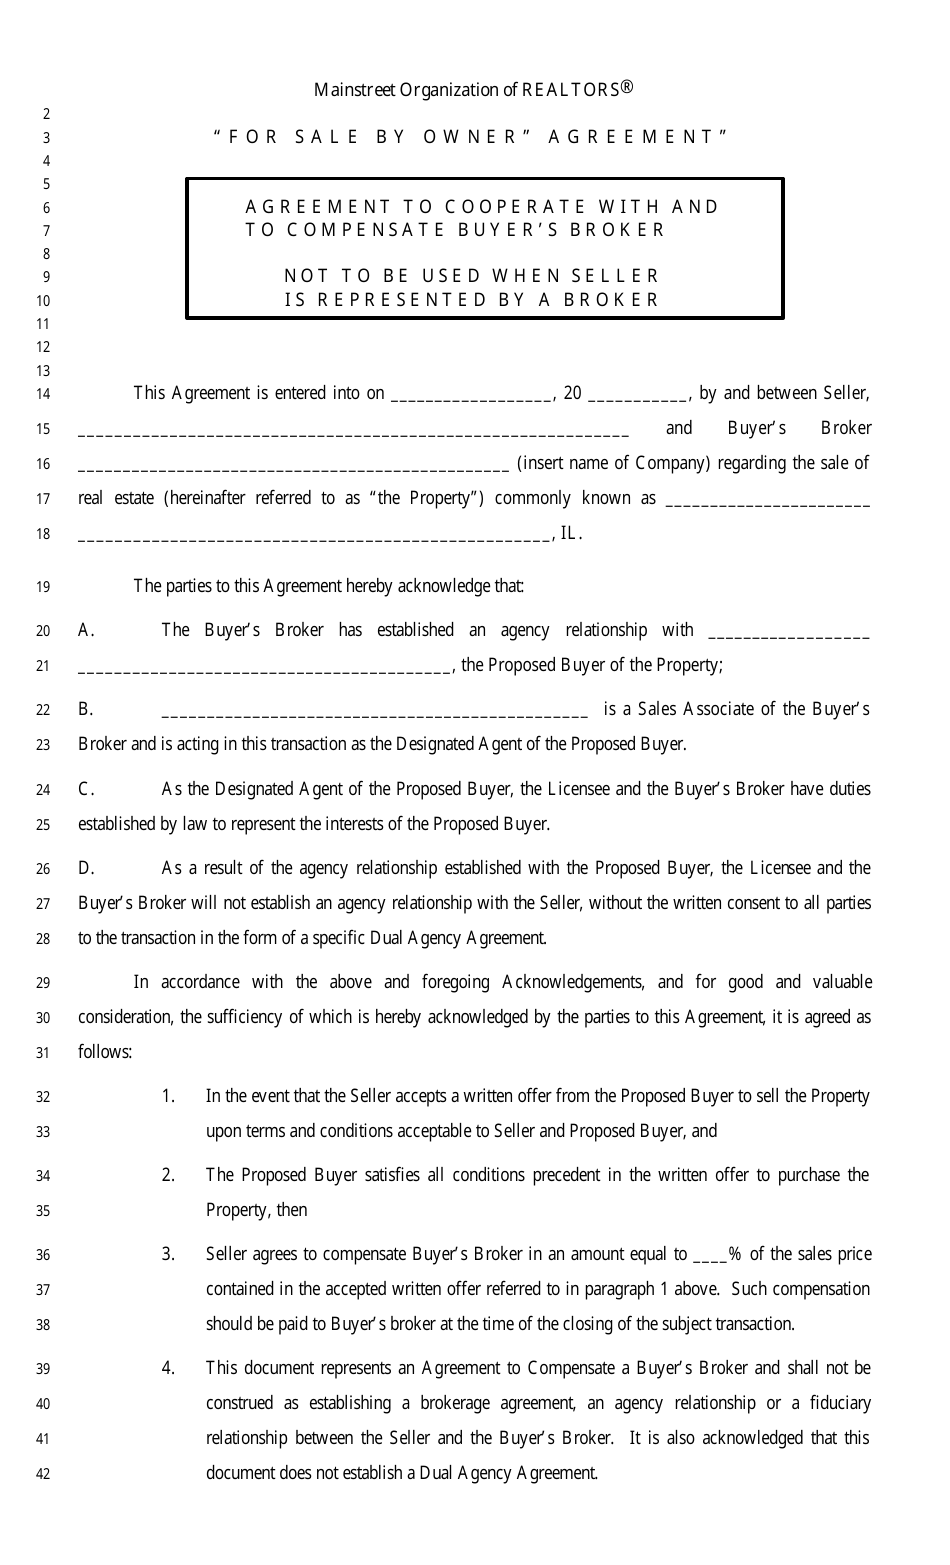 Agreement to Cooperate With and to Compensate Buyers Broker - Mainstreet Organization of Realtors - Illinois, Page 1